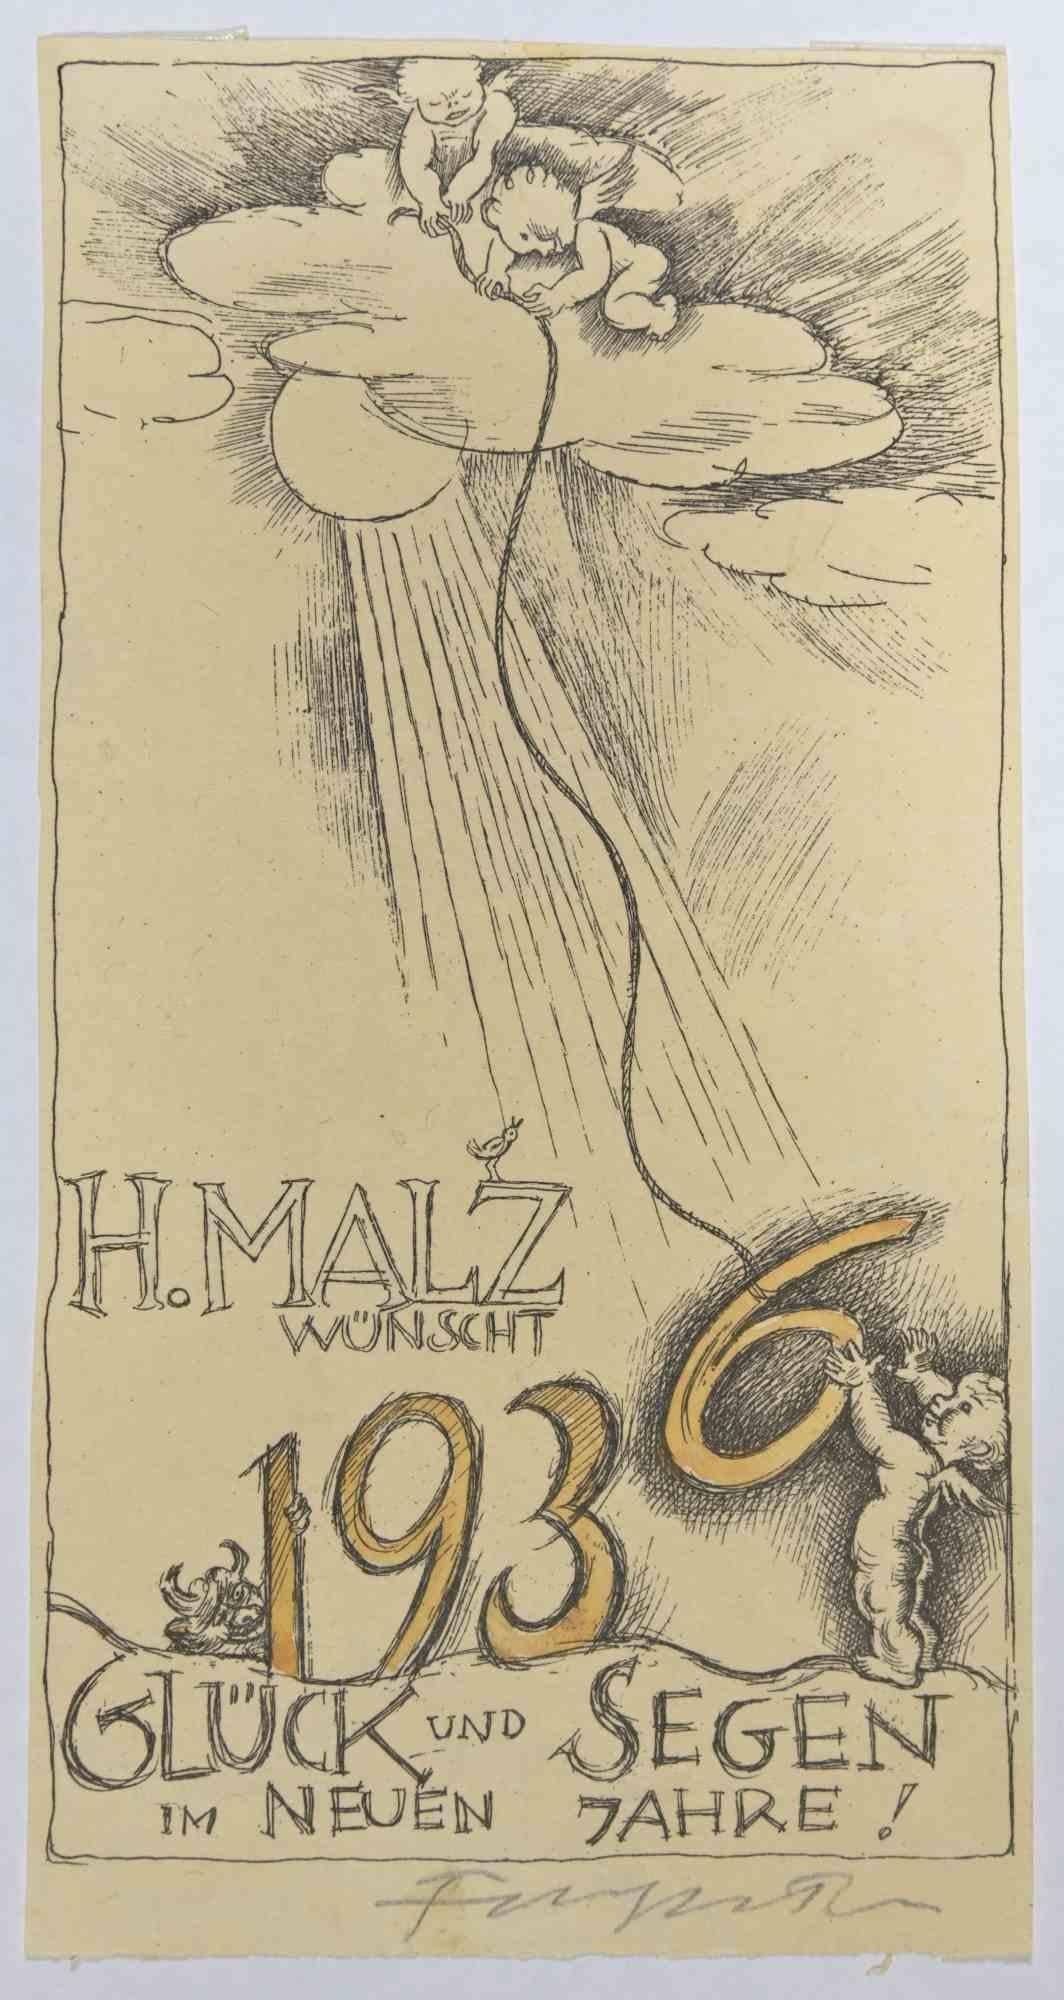 Ex Libris - H. Malz Wünscht is a Woodcut print created by Michel Fingesten in 1936.

Hand signed on the lower margin.

Good conditions.

Michel Fingesten (1884 - 1943) was a Czech painter and engraver of Jewish origin. He is considered one of the